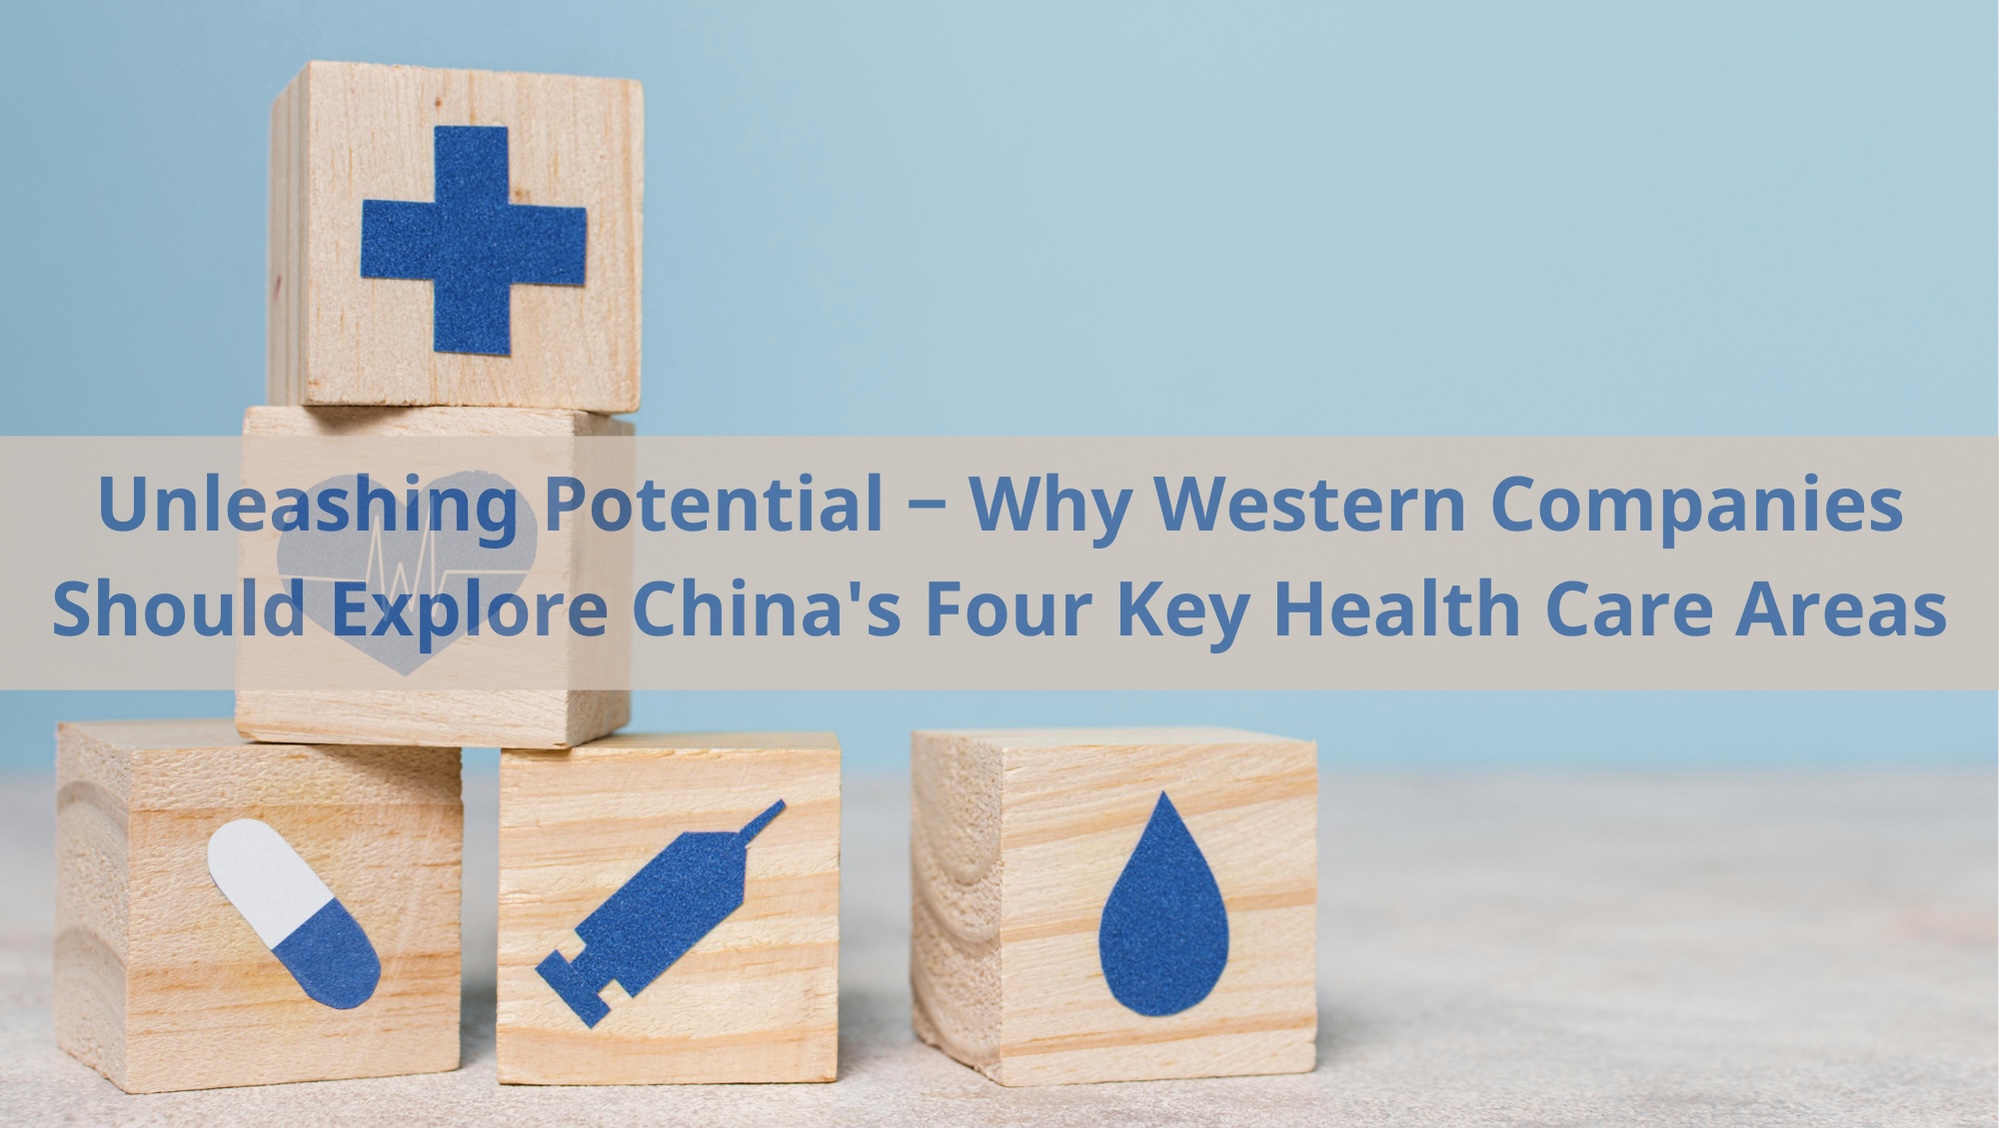 Unleashing Potential − Why Western Companies Should Explore China’s Four Key Health Care Areas